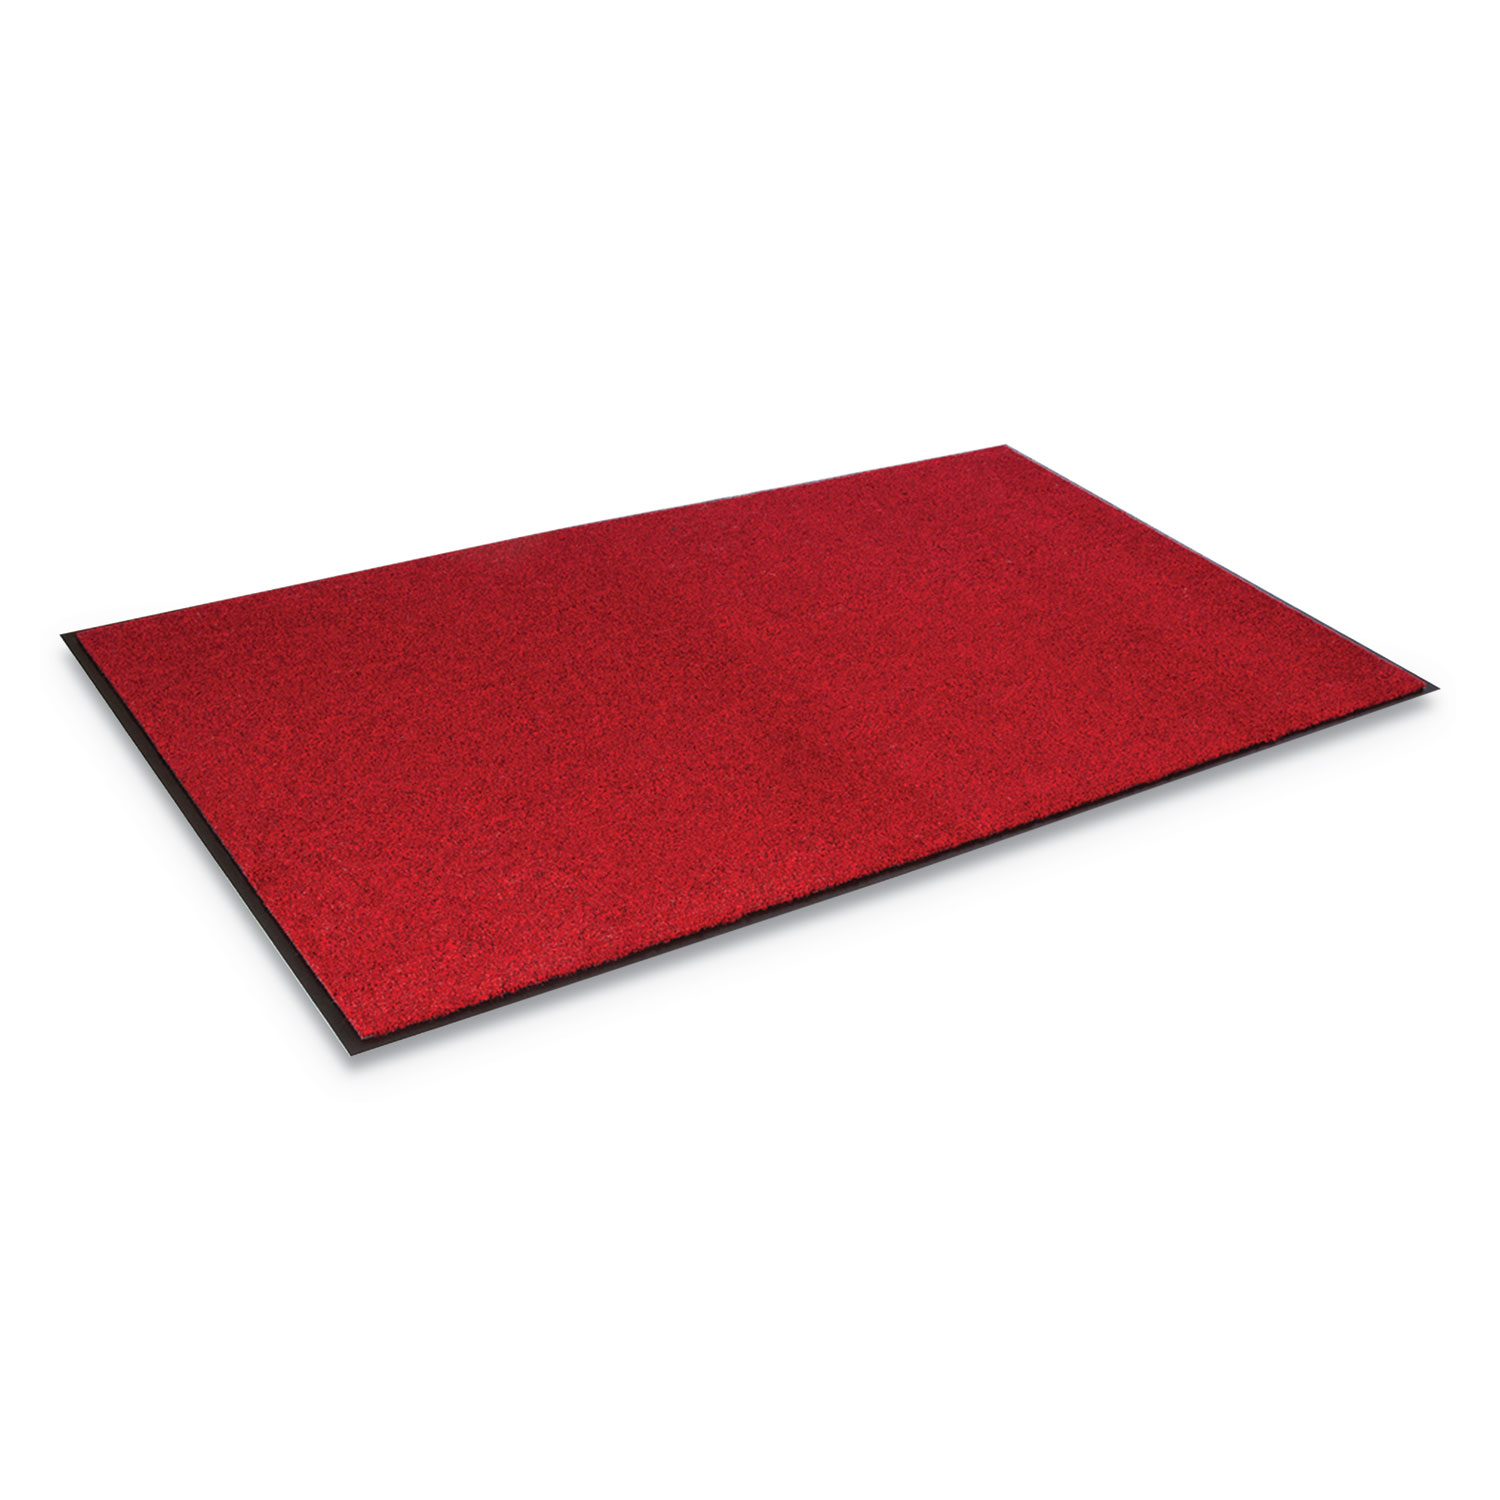  Crown GS 0035CR Rely-On Olefin Indoor Wiper Mat, 36 x 60, Castellan Red (CWNGS0035CR) 